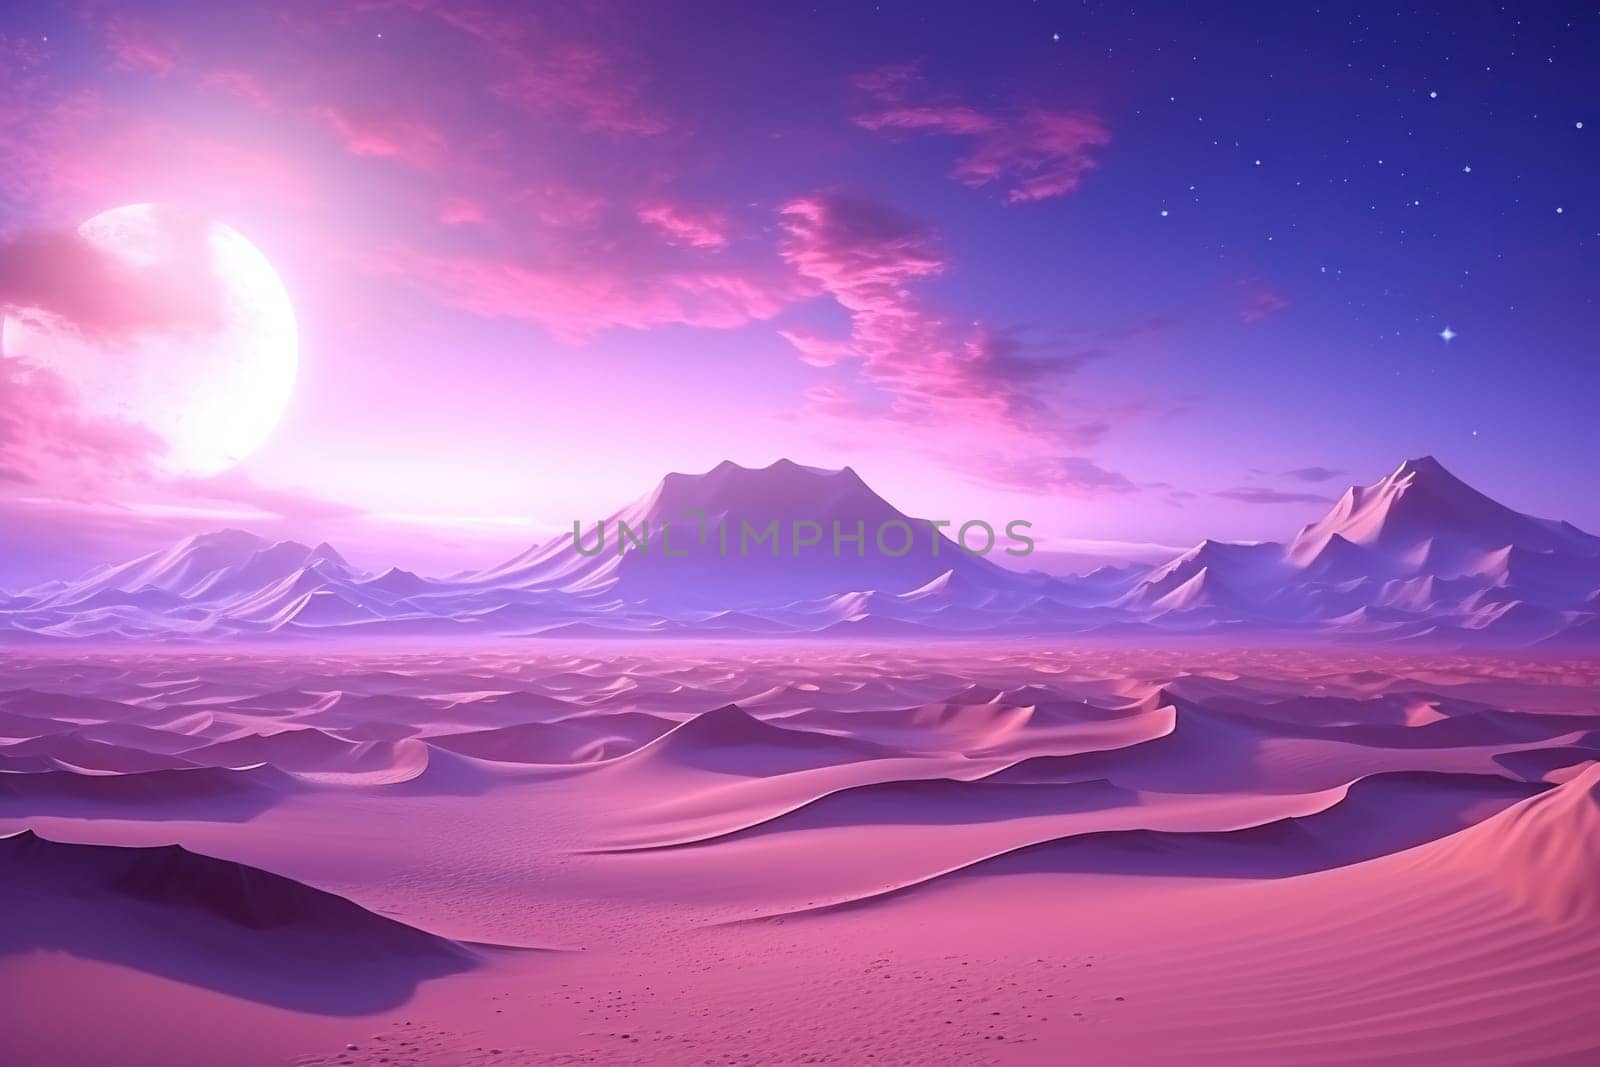 A beautiful deserted place in purple light.